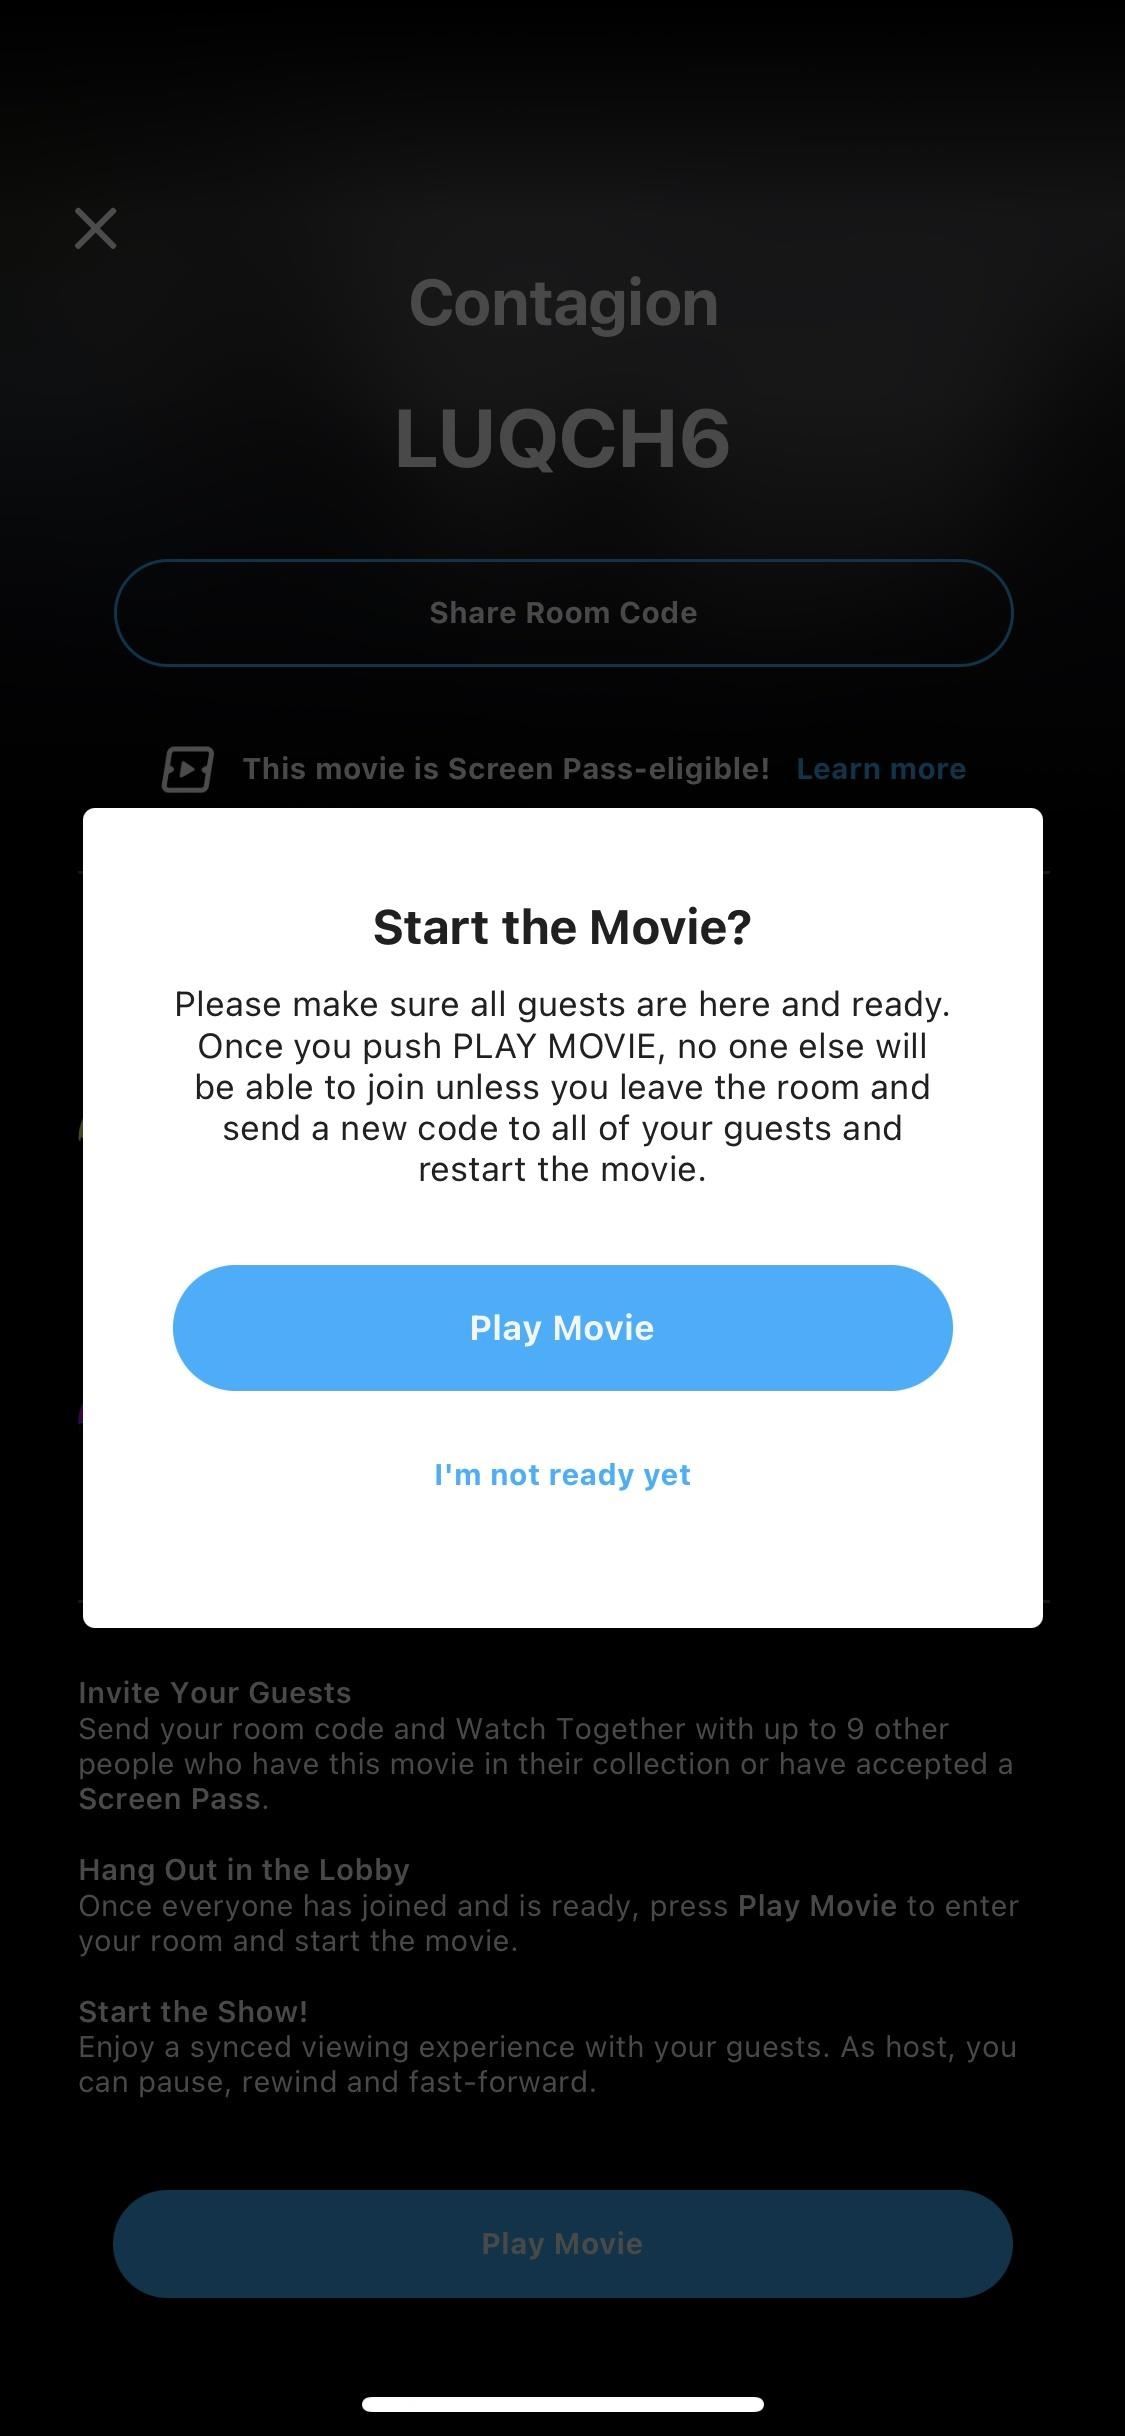 Watch Films Remotely with Family & Friends at the Same Time Using Movies Anywhere's Watch Together Rooms